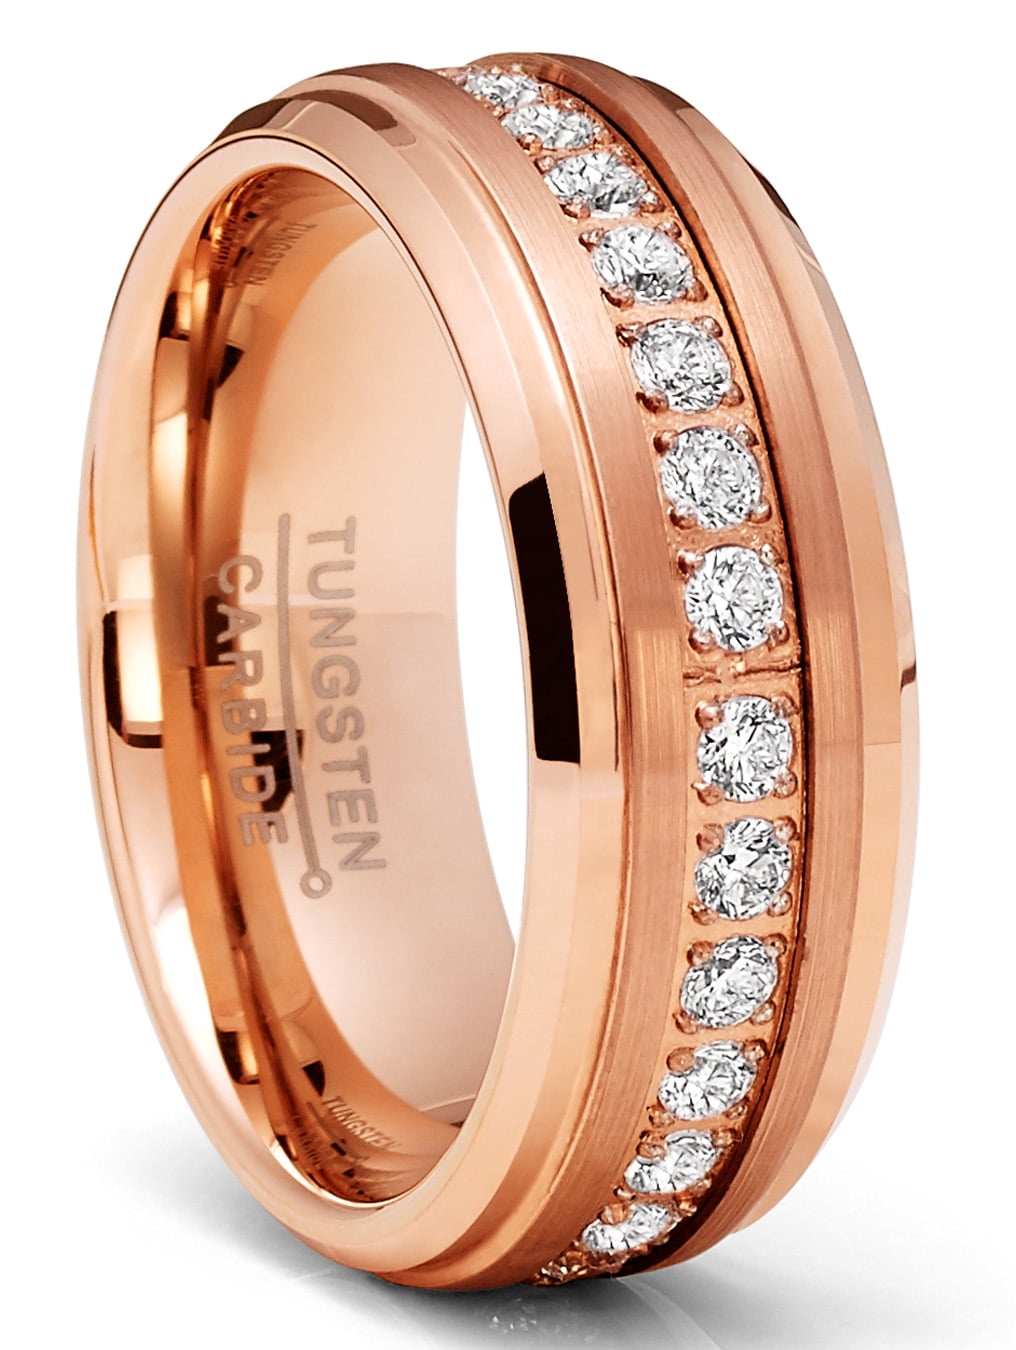 10 CLEARANCE----ROSE GOLD TONE CZ ANNIVERSARY ETERNITY WEDDING BAND RING SIZE 7